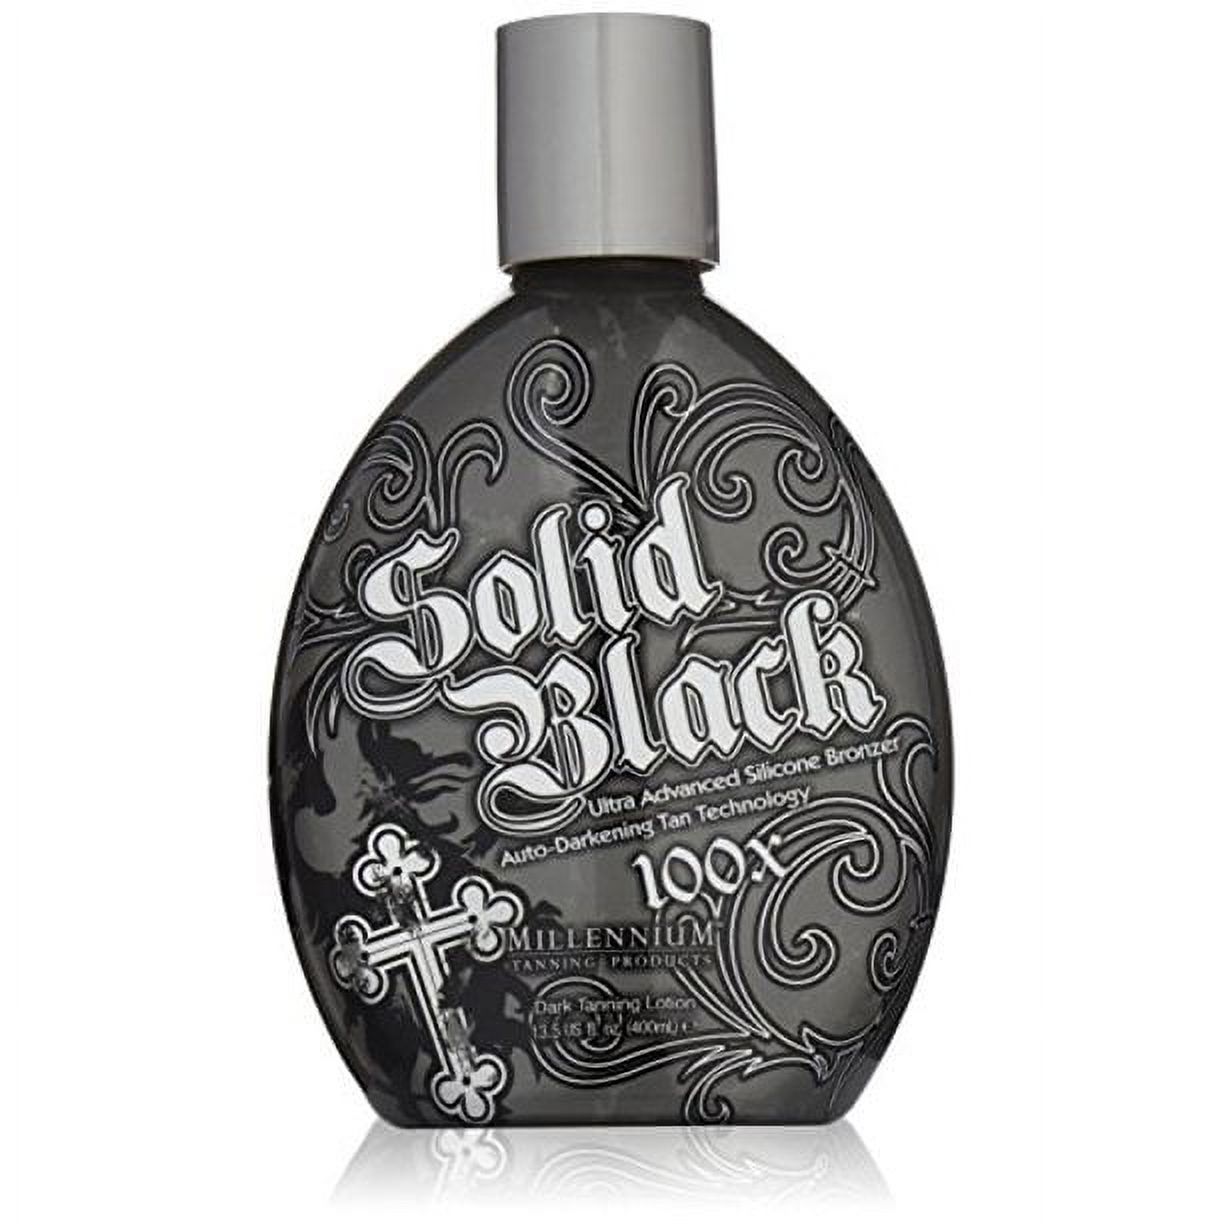 Millennium Tanning Solid Black Tanning Lotion - image 4 of 4